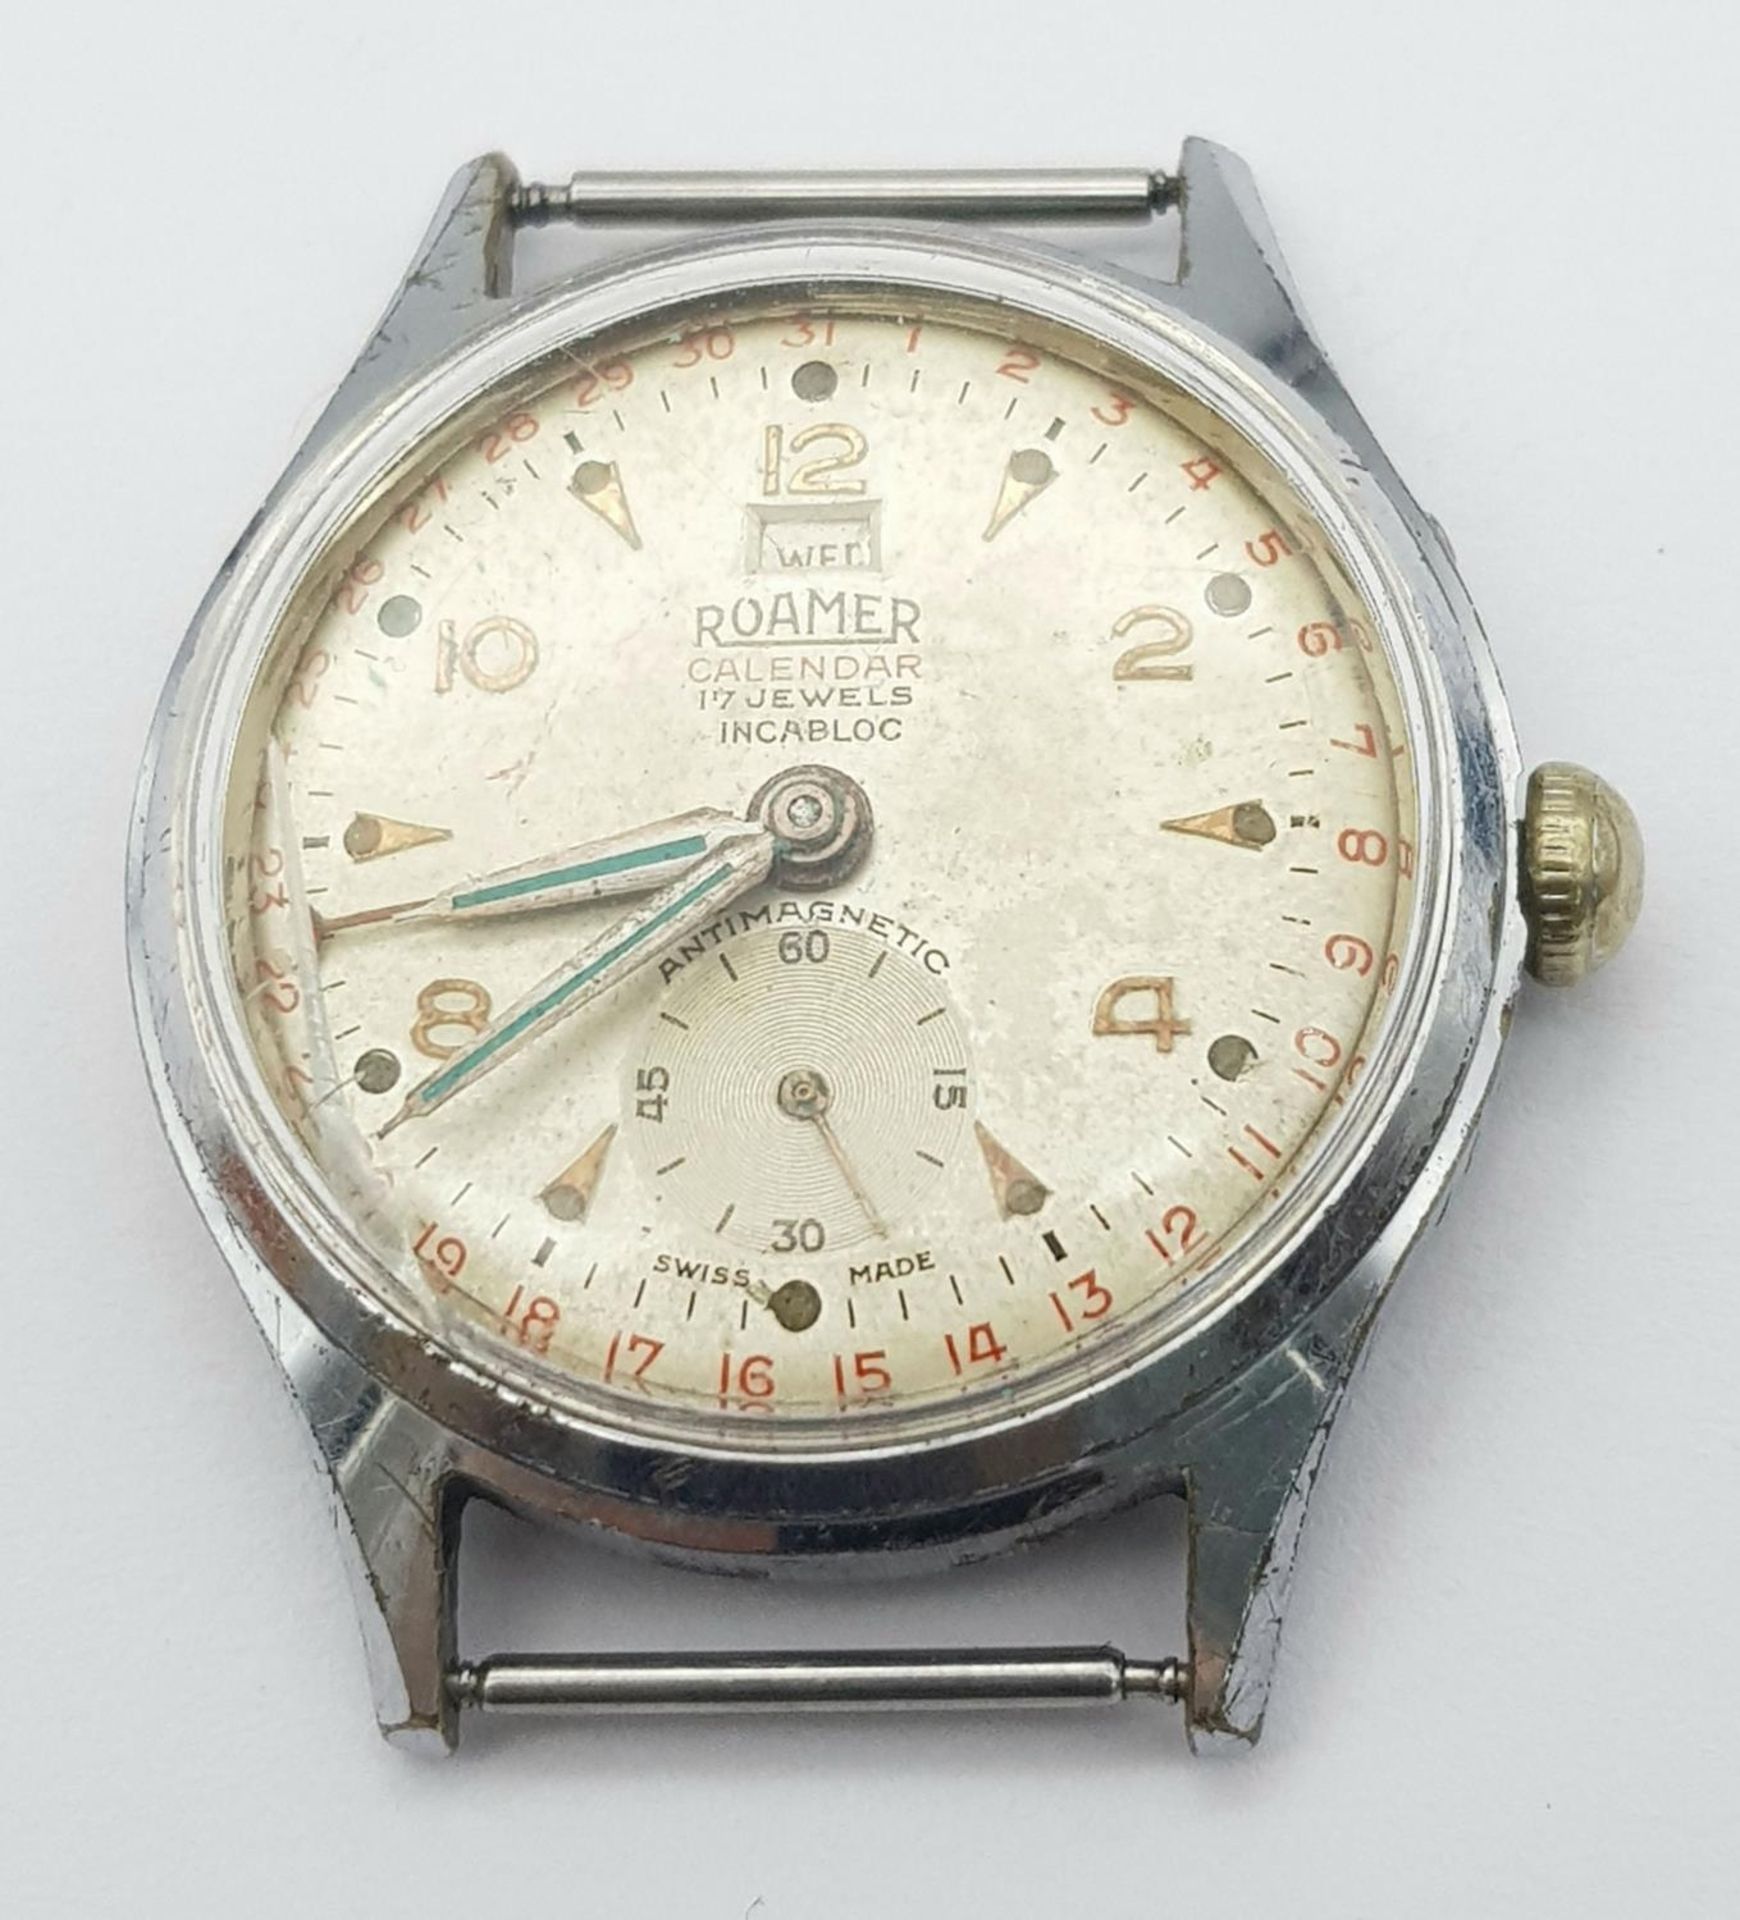 A Vintage Roamer Calendar 17 Jewels Stainless Steel Watch Case -33mm. Patinaed dial with sub dial. - Image 2 of 4